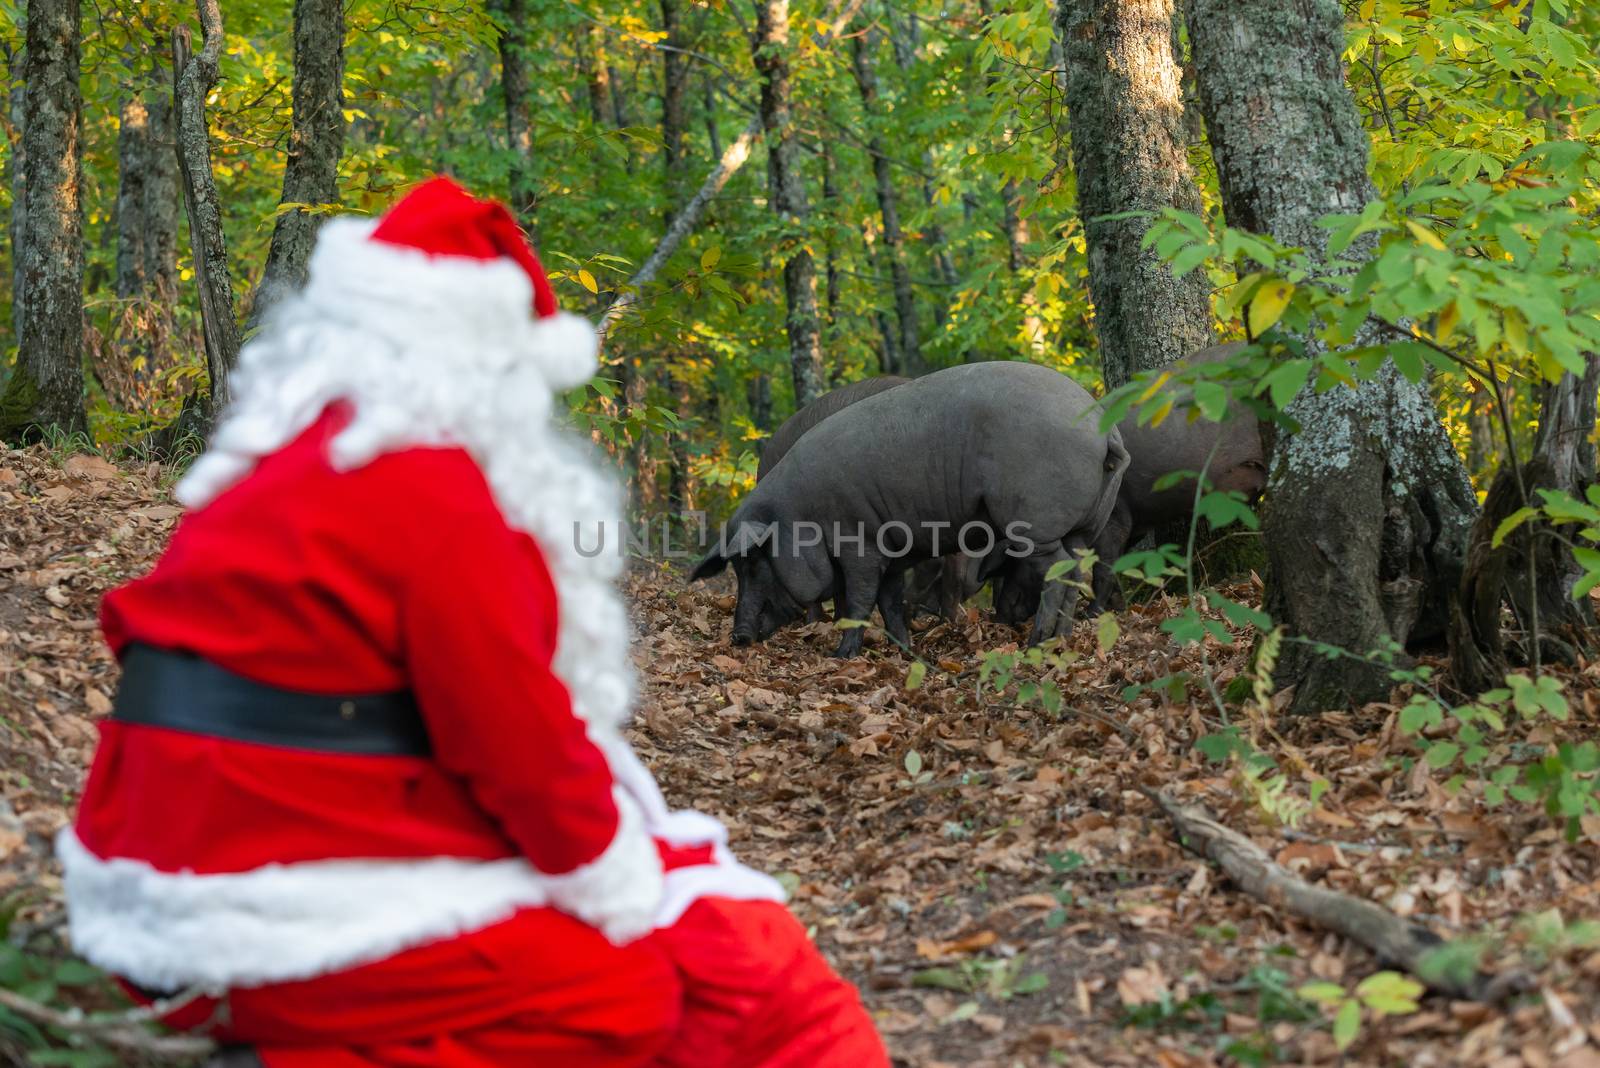 Santa Claus blurred looking pigs by Fotoeventis